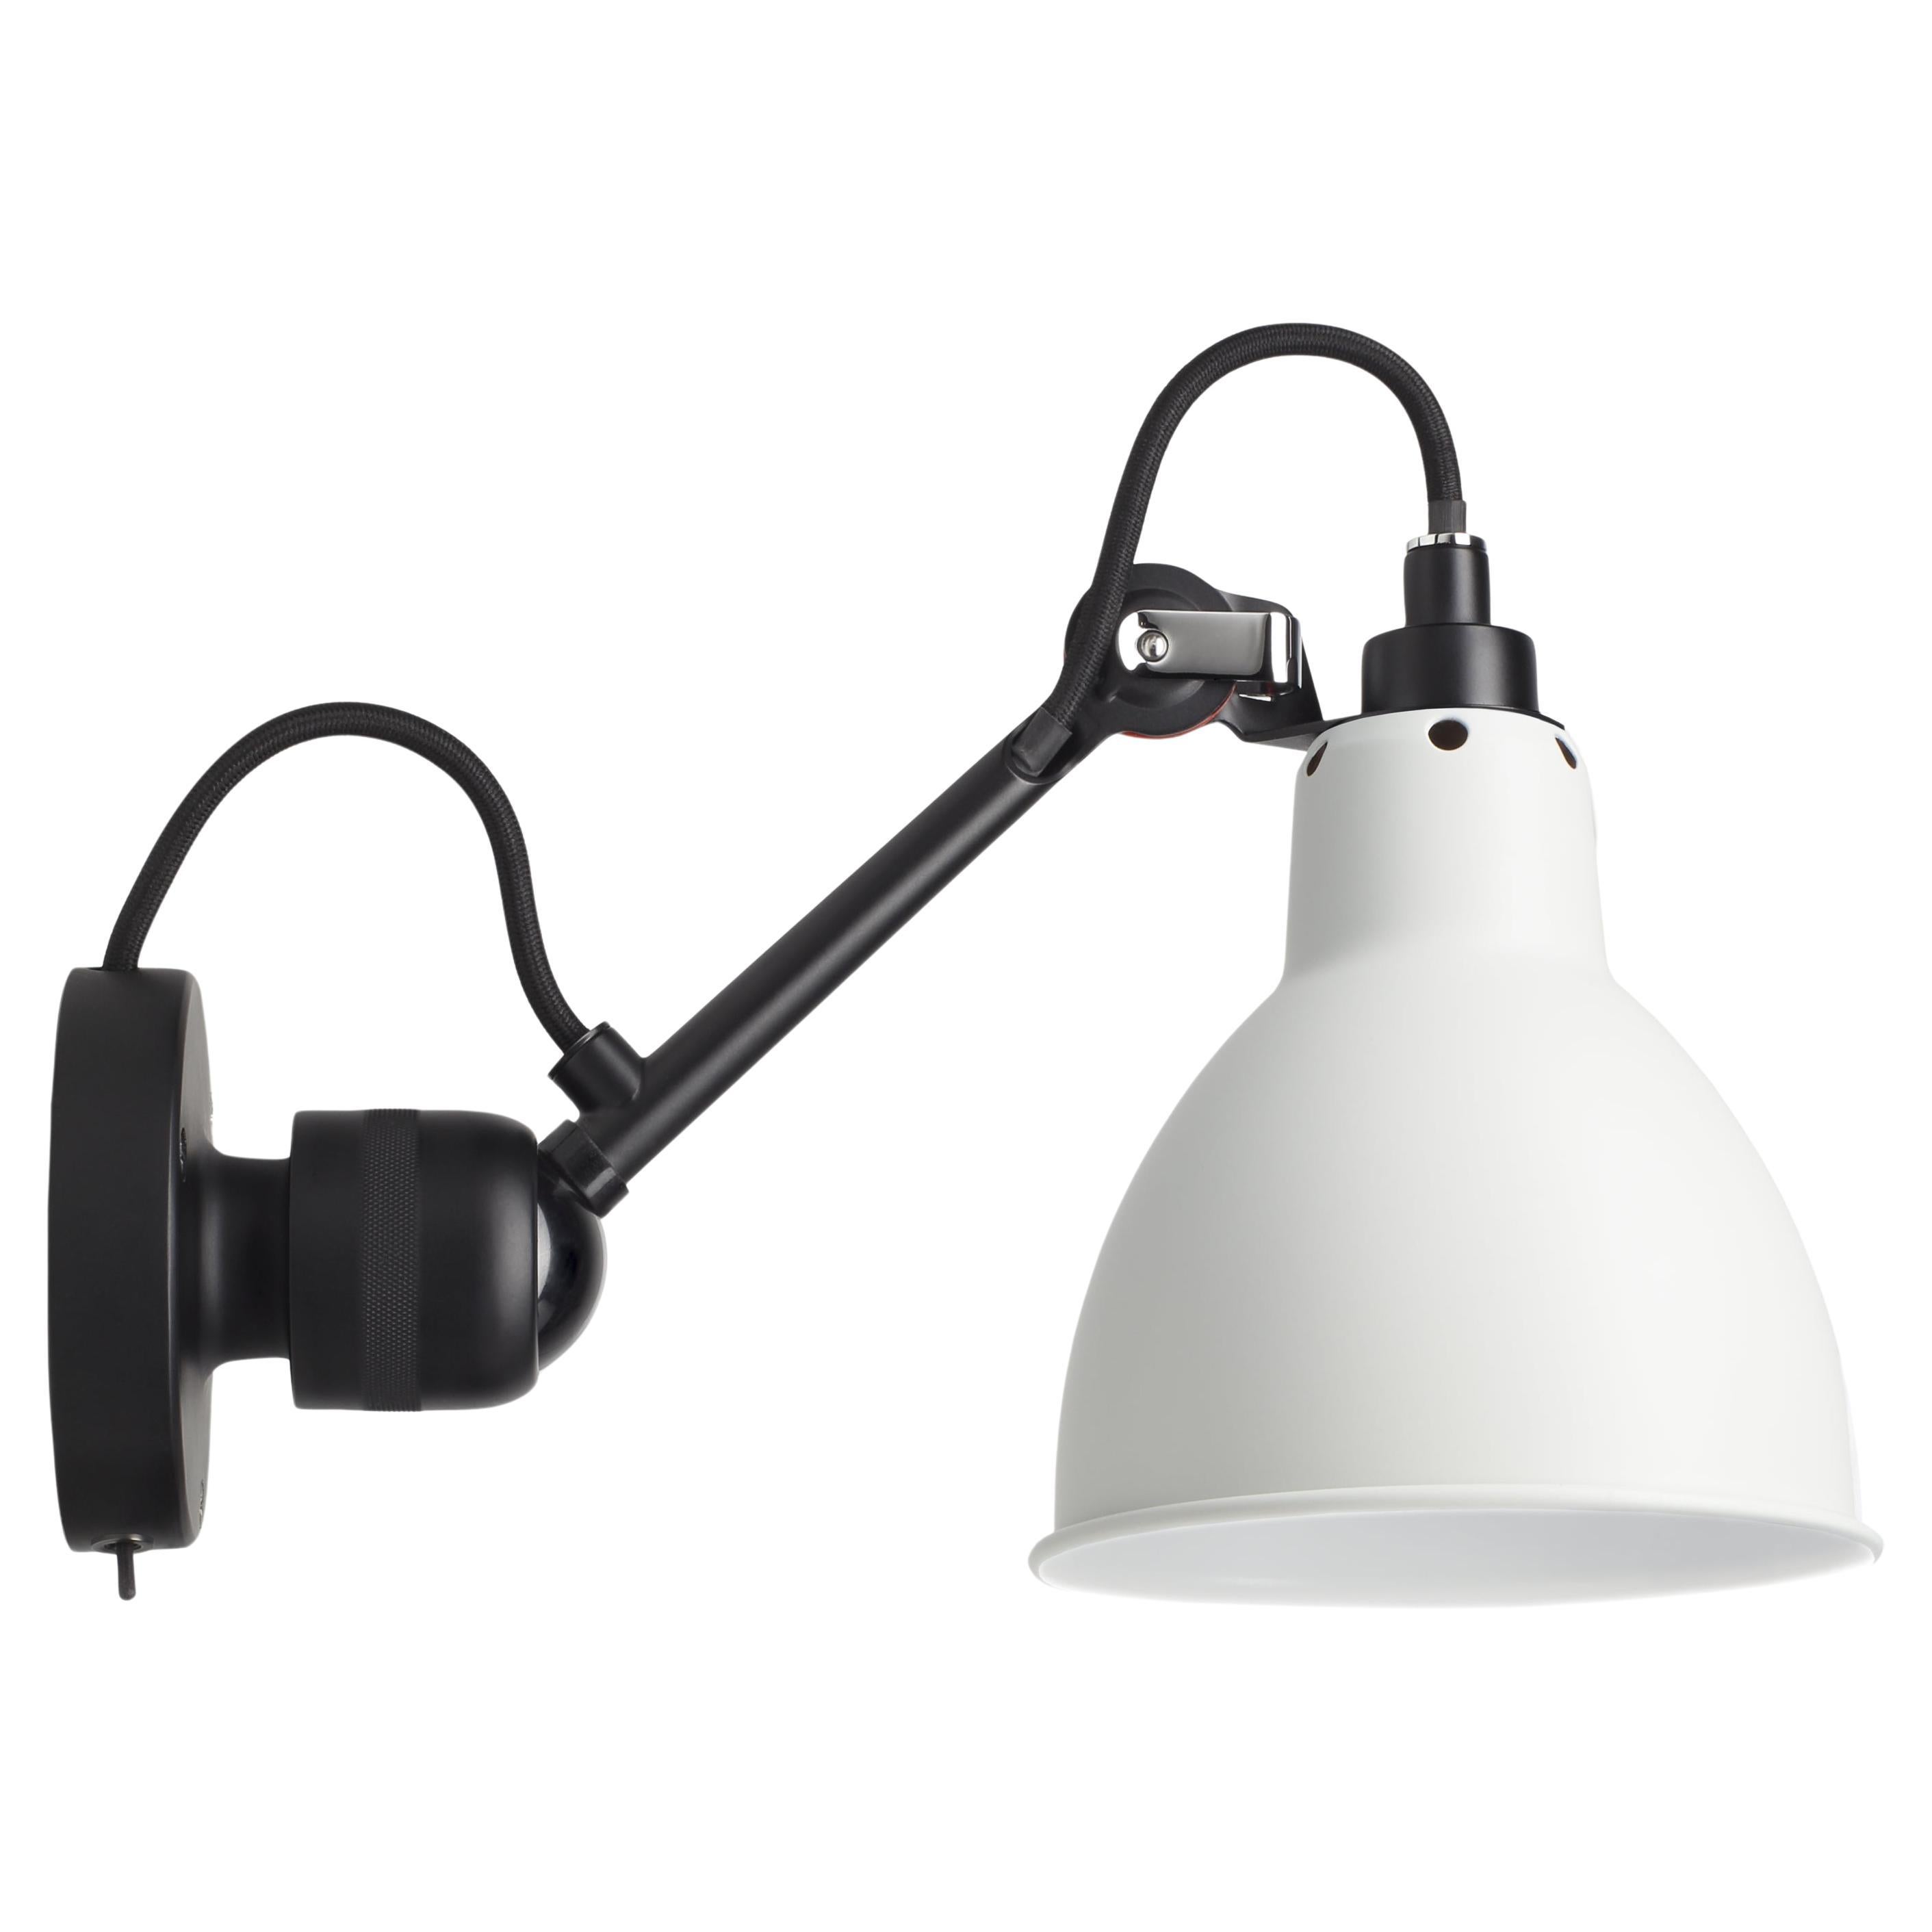 DCW Editions La Lampe Gras N°304 SW Wall Lamp in Black Arm and White Shade For Sale